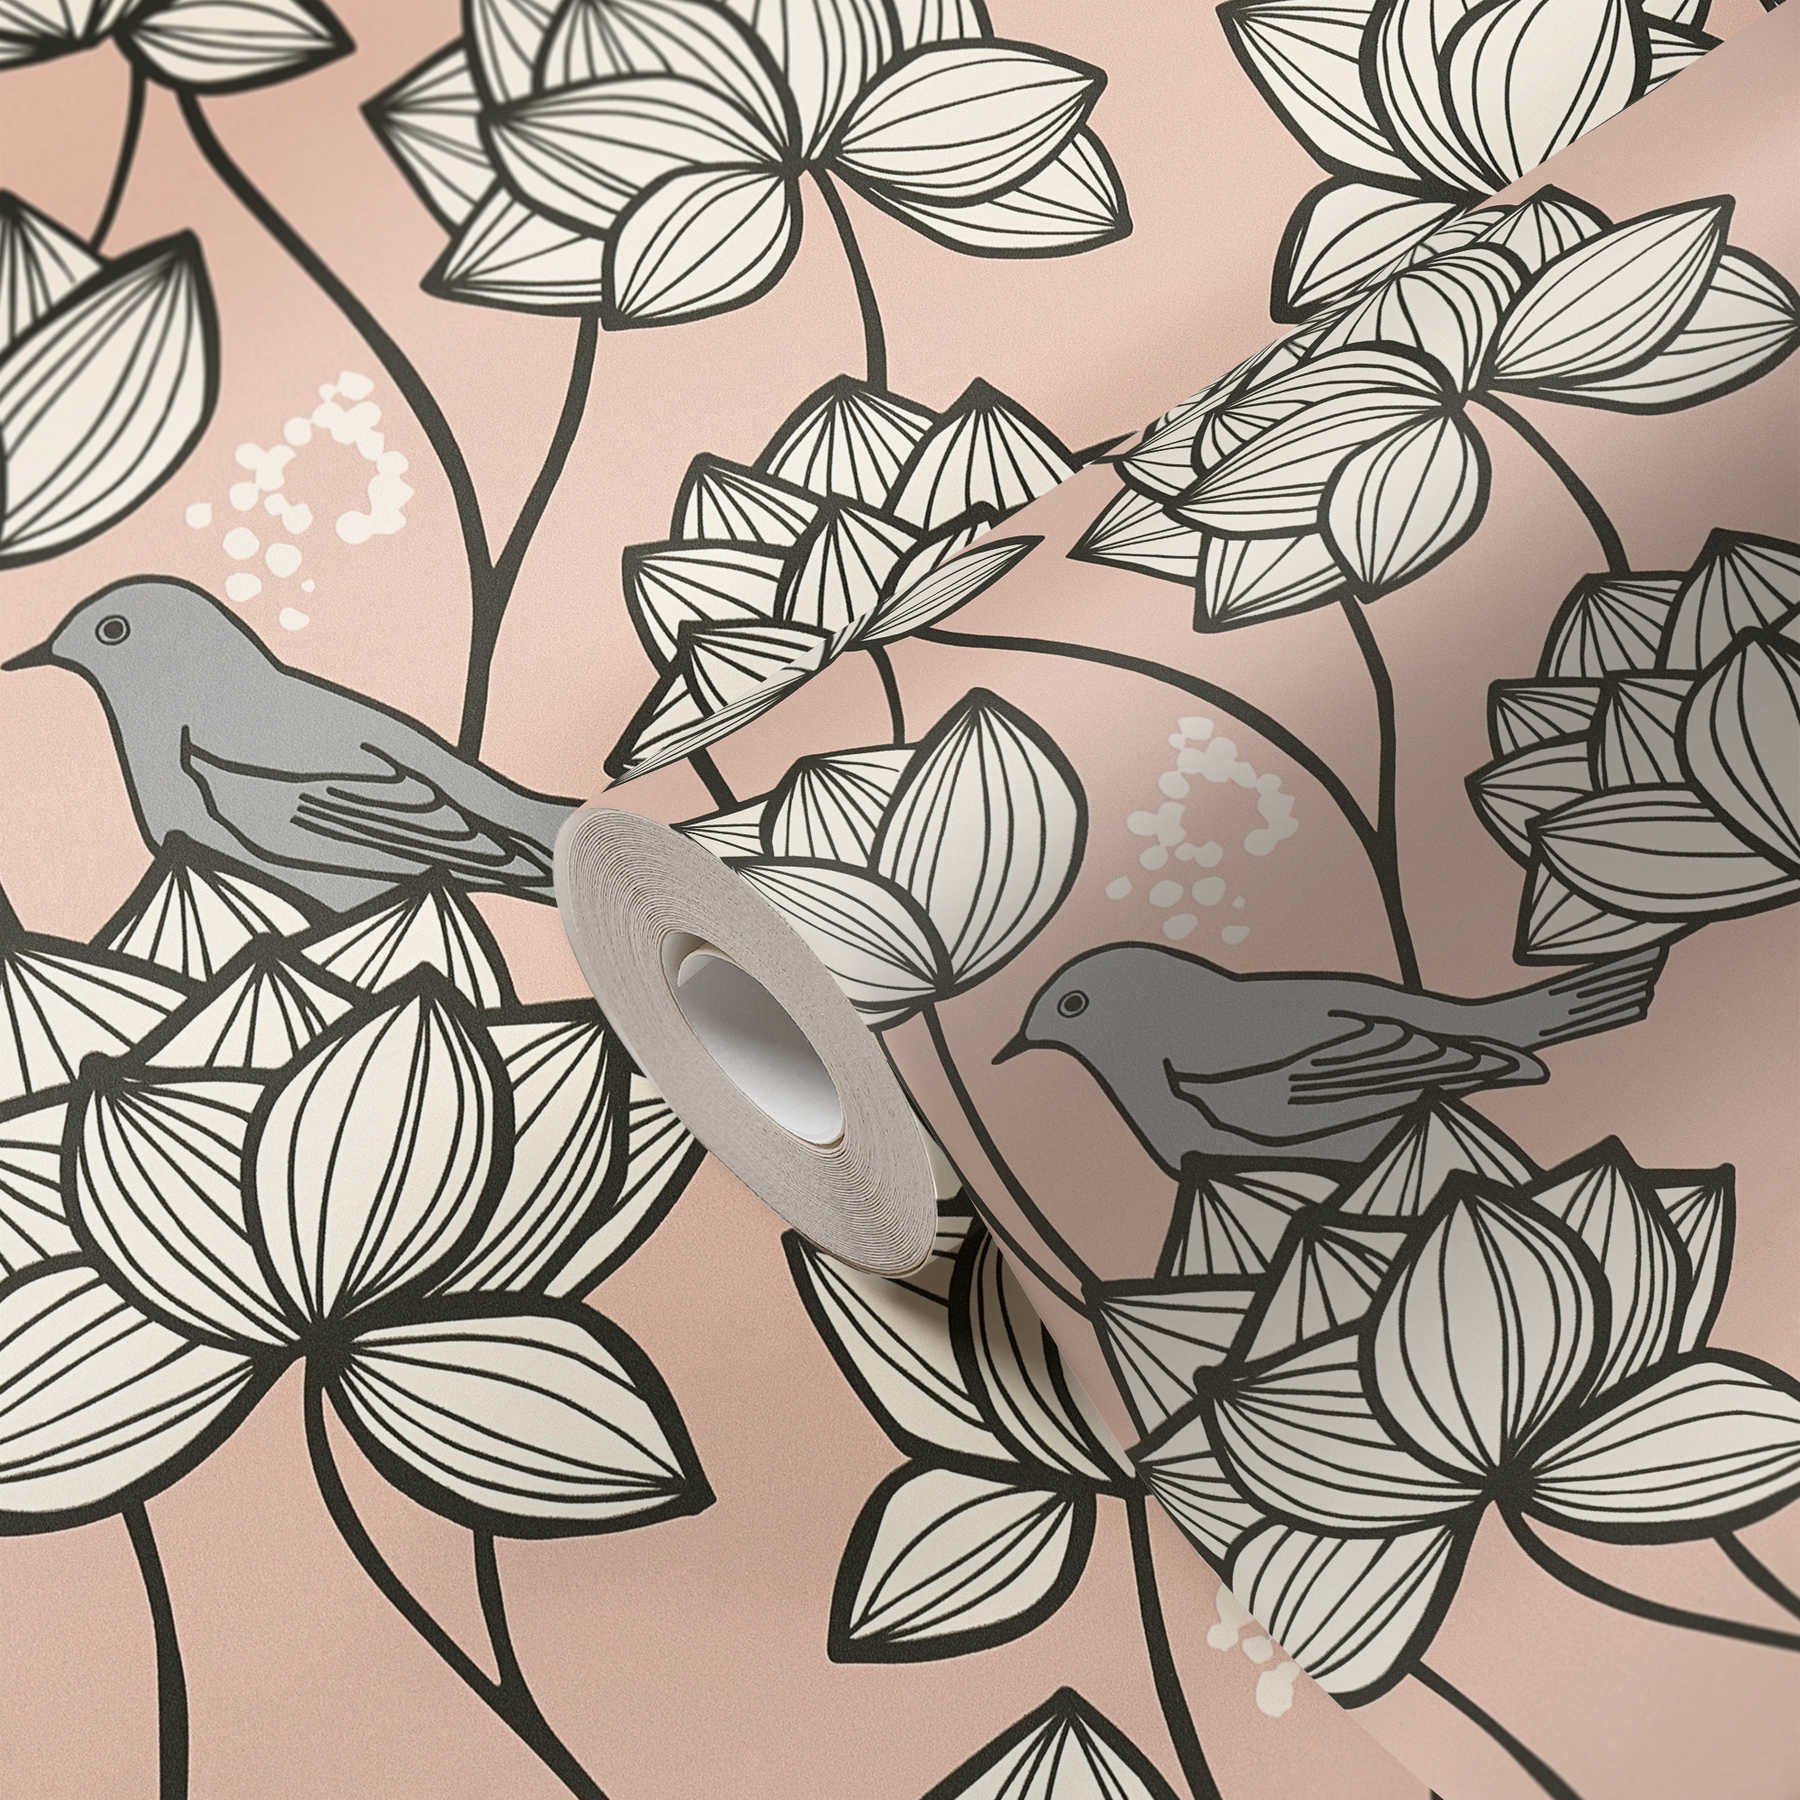             Non-woven wallpaper flowers vines with birds in line art style - grey, pink
        